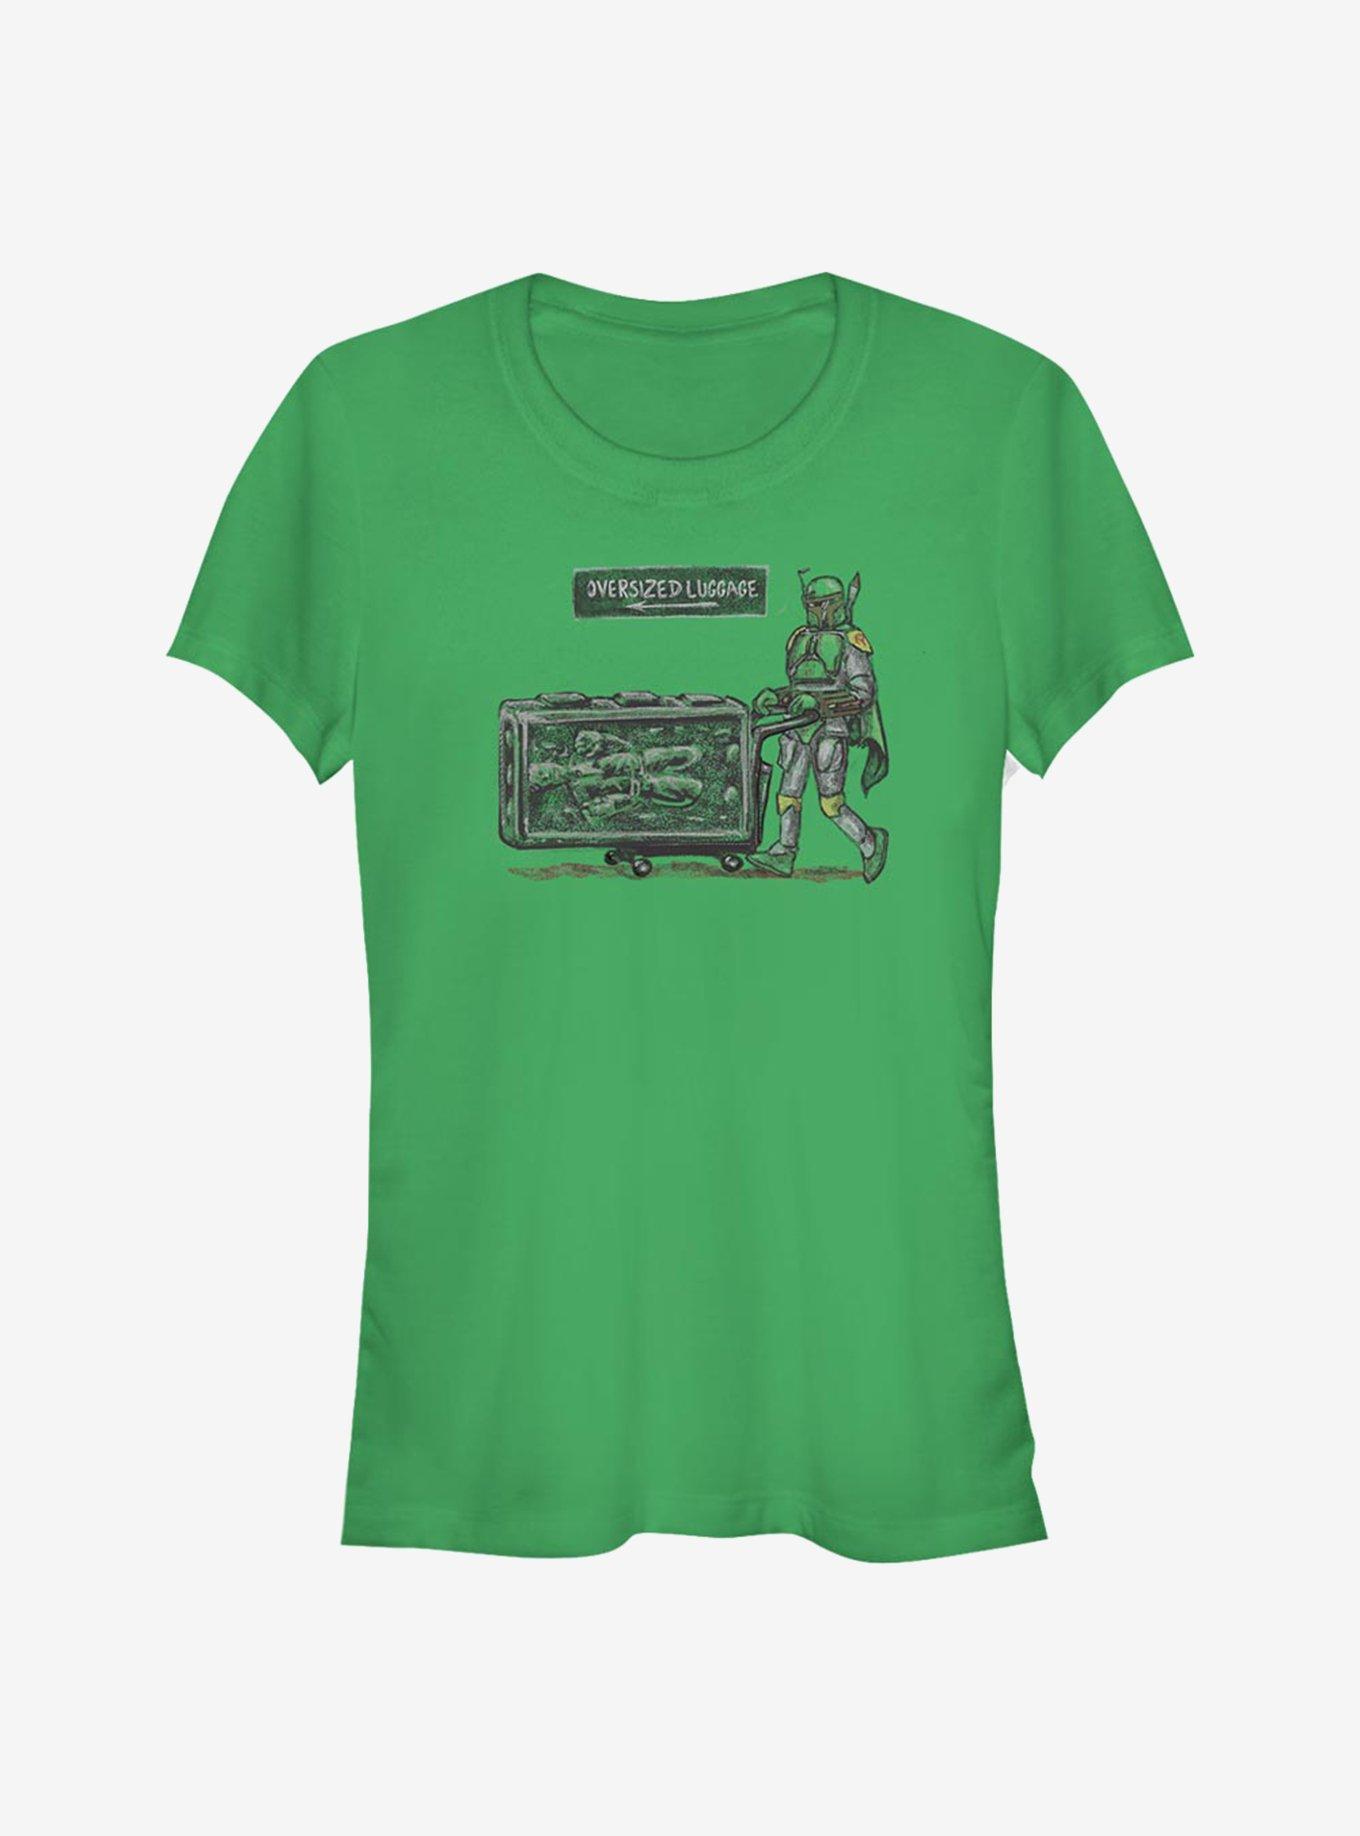 Star Wars Solo Carry On Girls T-Shirt, KELLY, hi-res